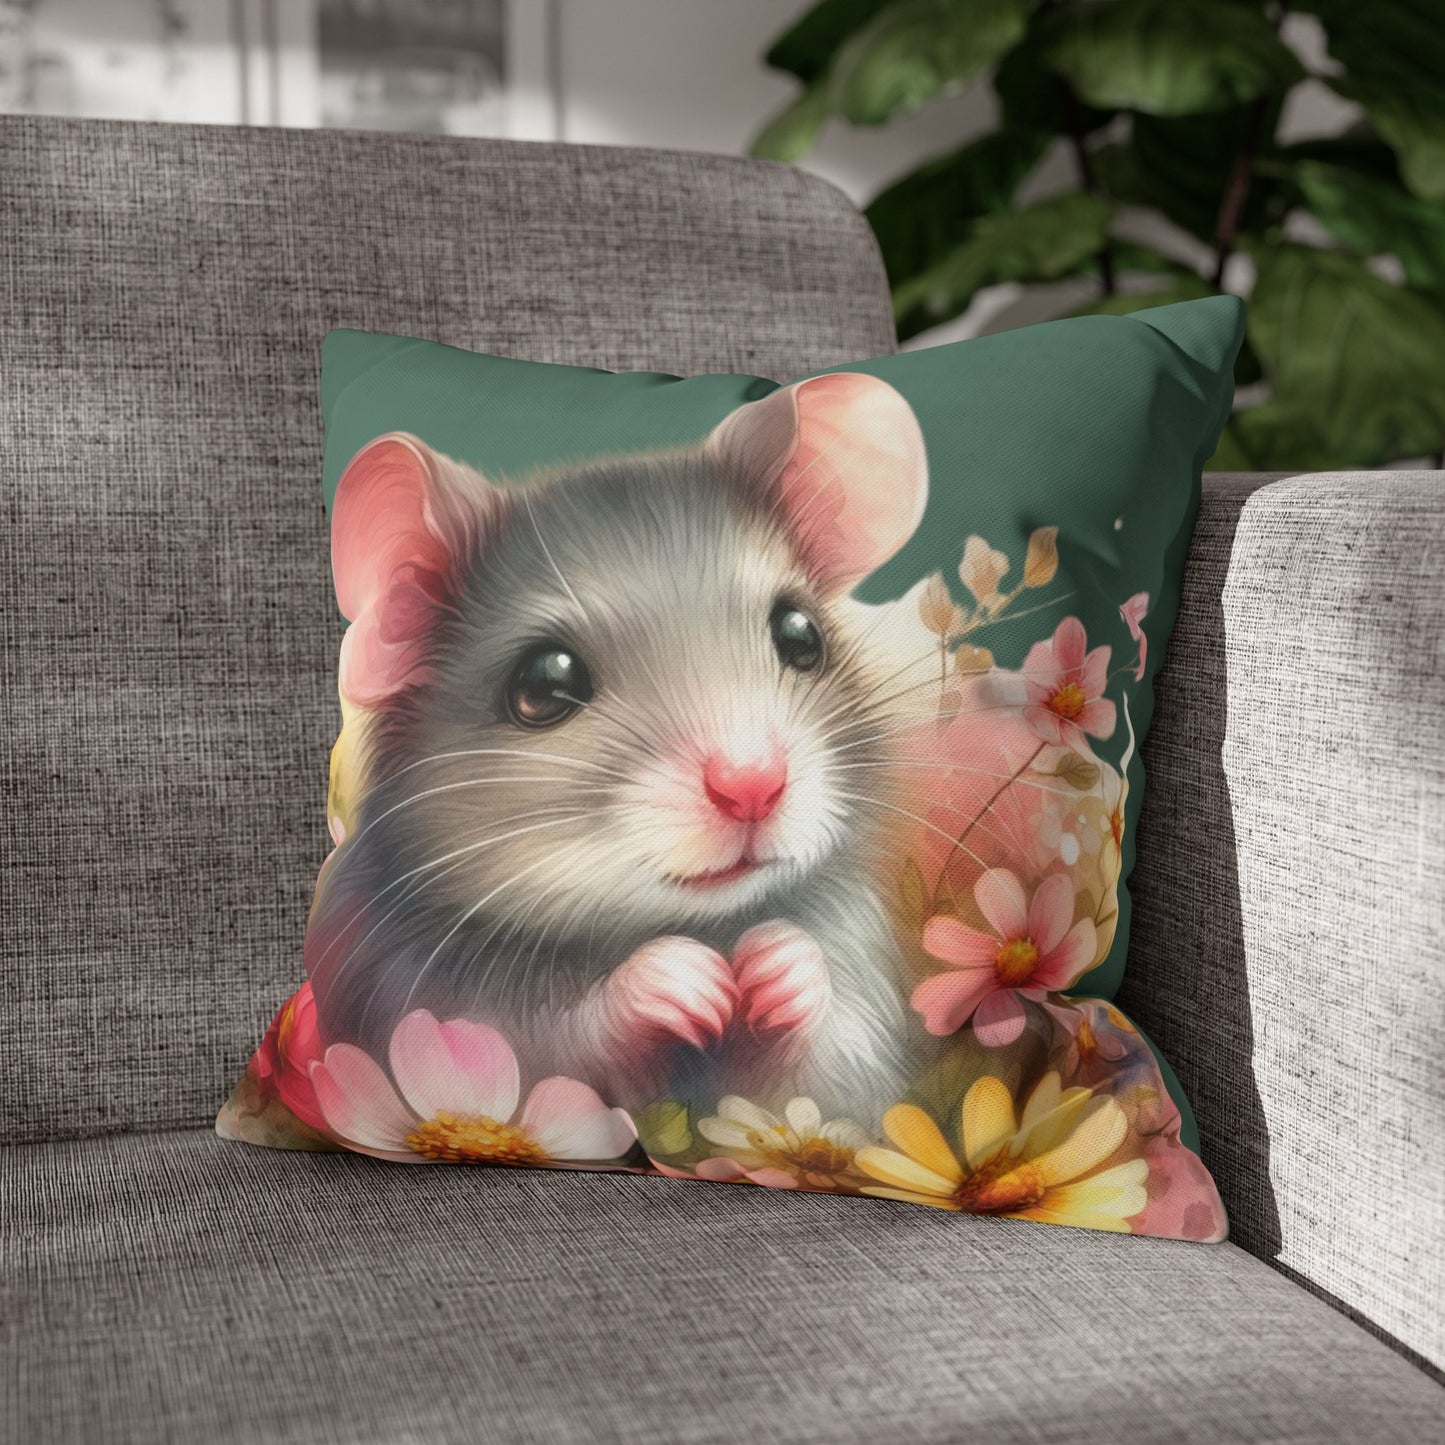 Mouse Cushion Cover